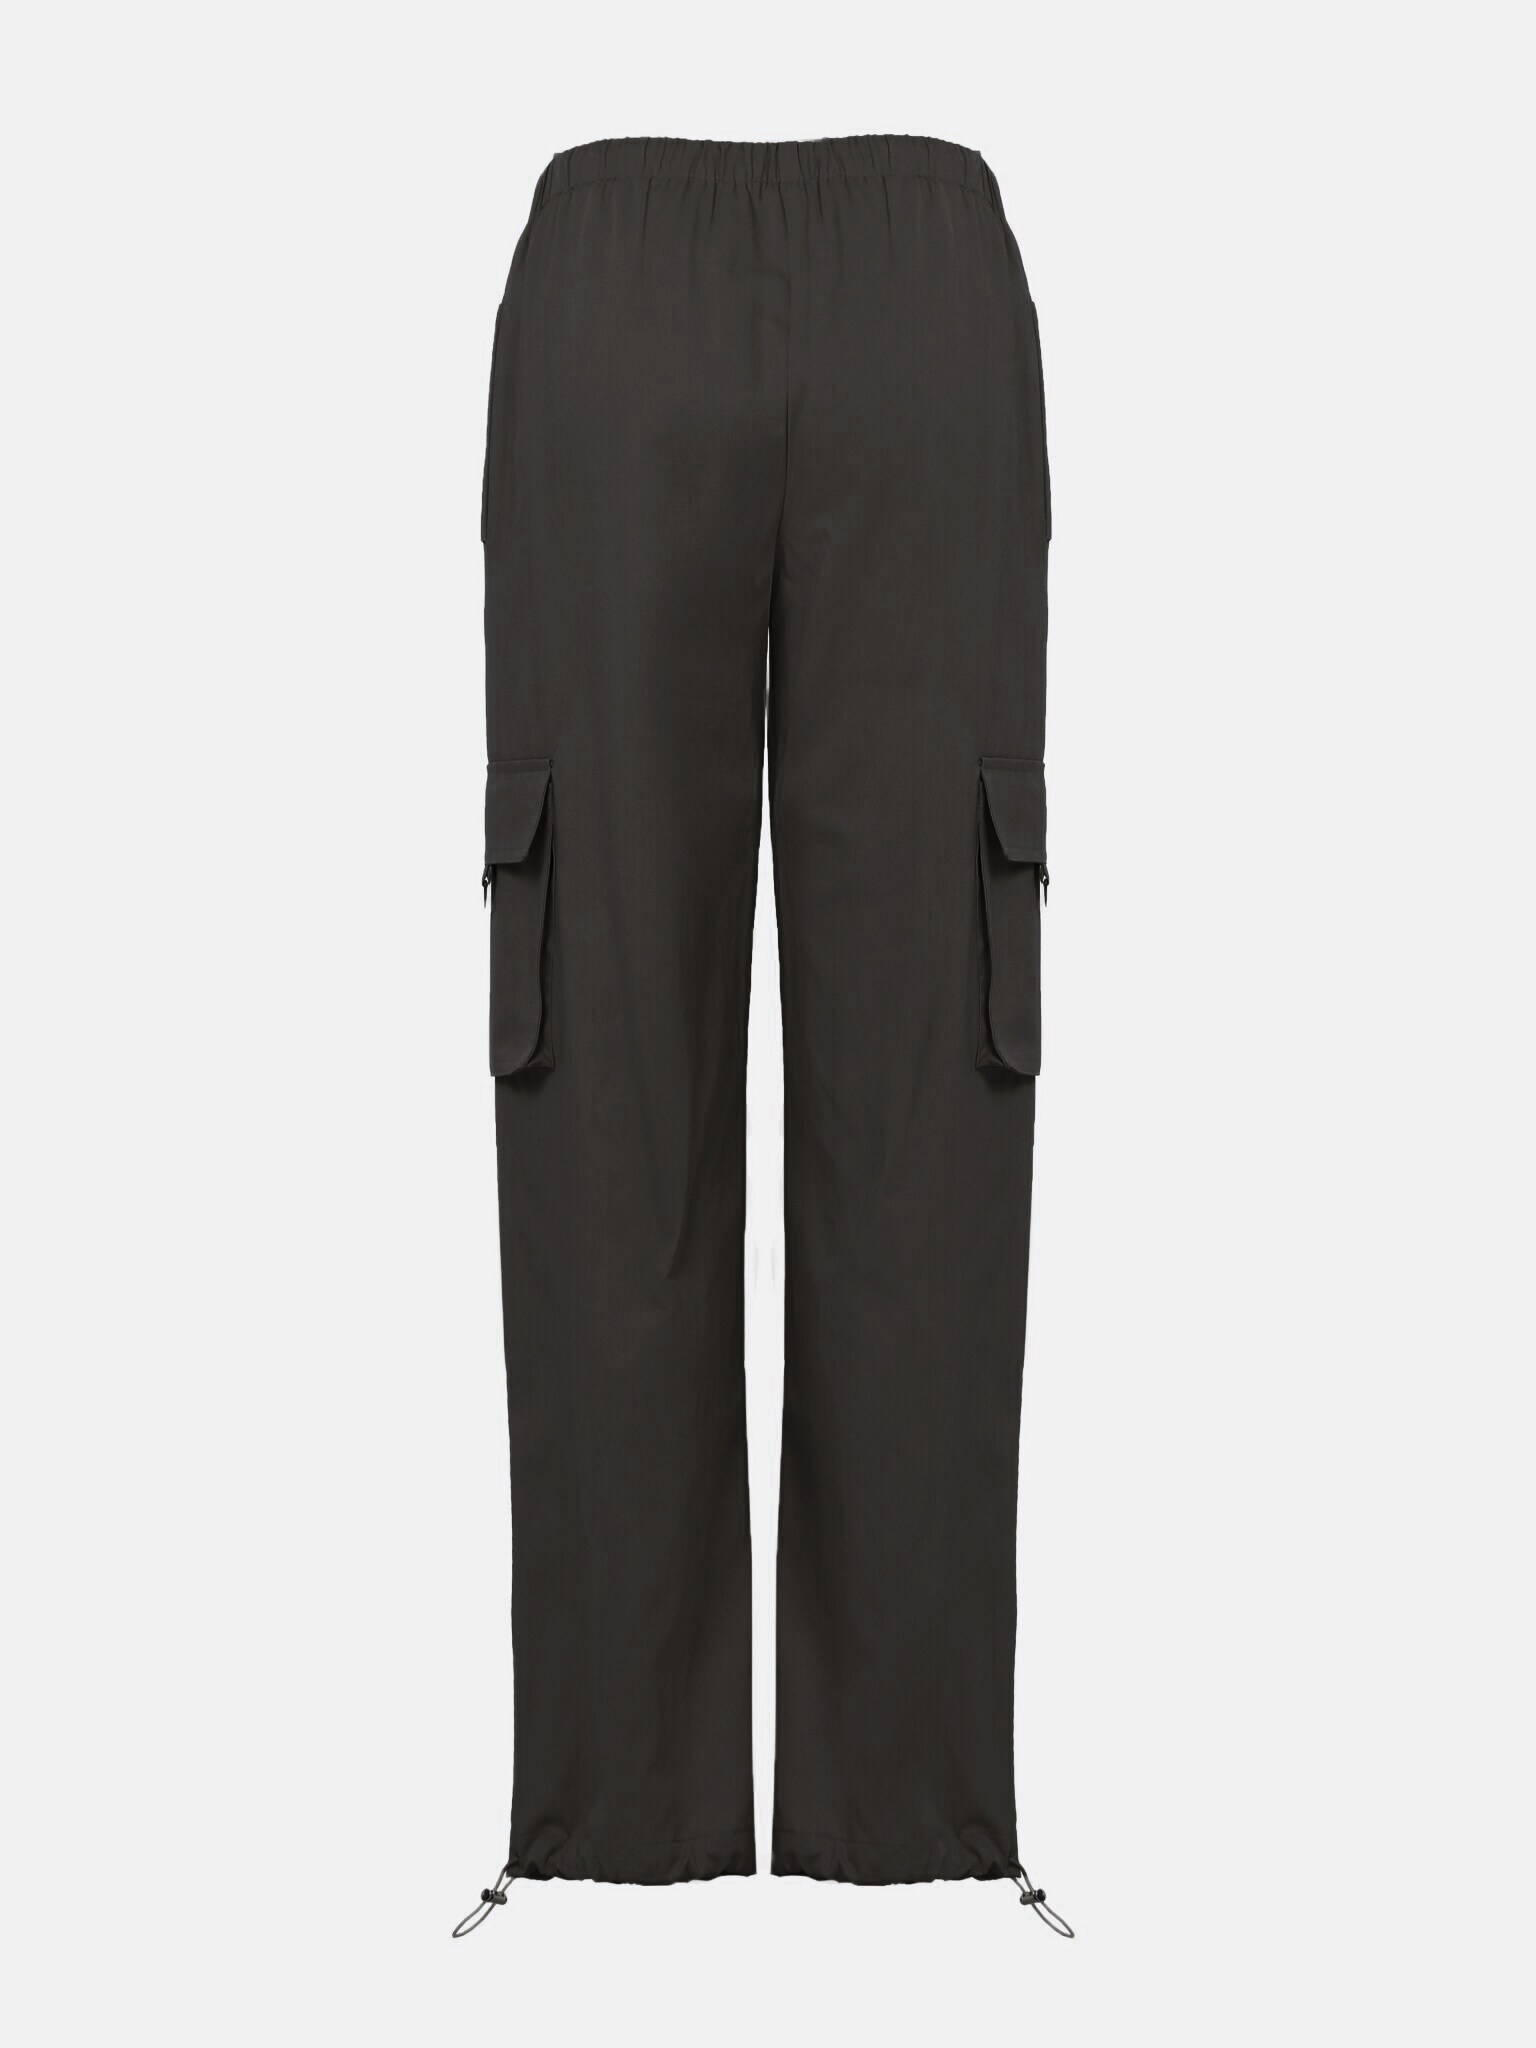 Loose cargo trousers with elastic pants legs :: LICHI - Online 